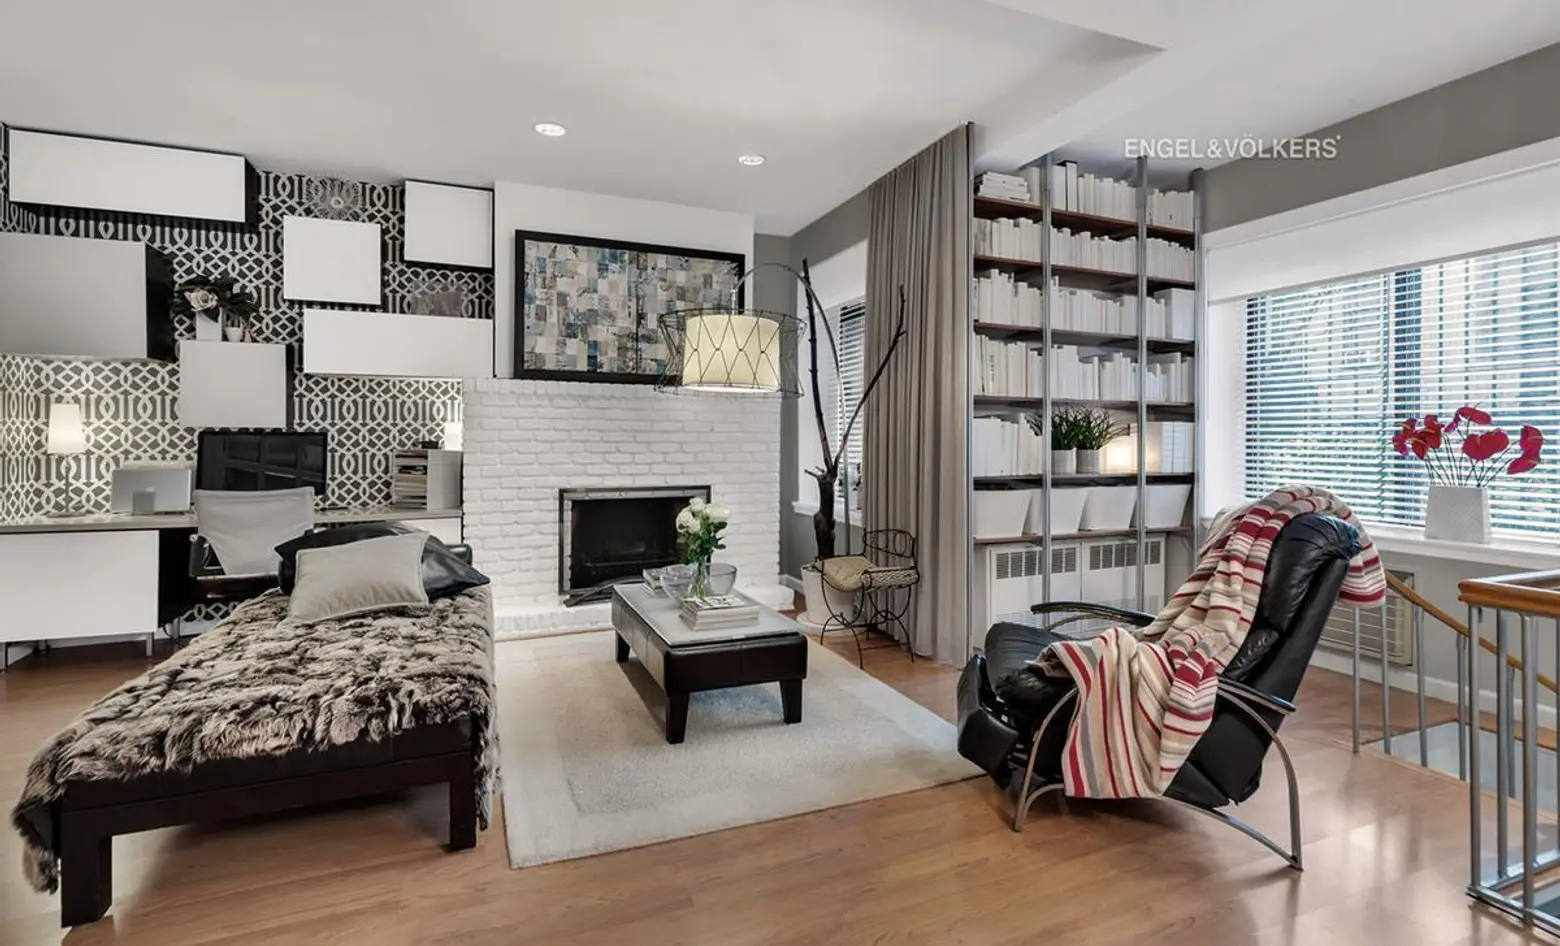 For $900K, this Yorkville co-op offers two floors, a clever layout, and a private backyard